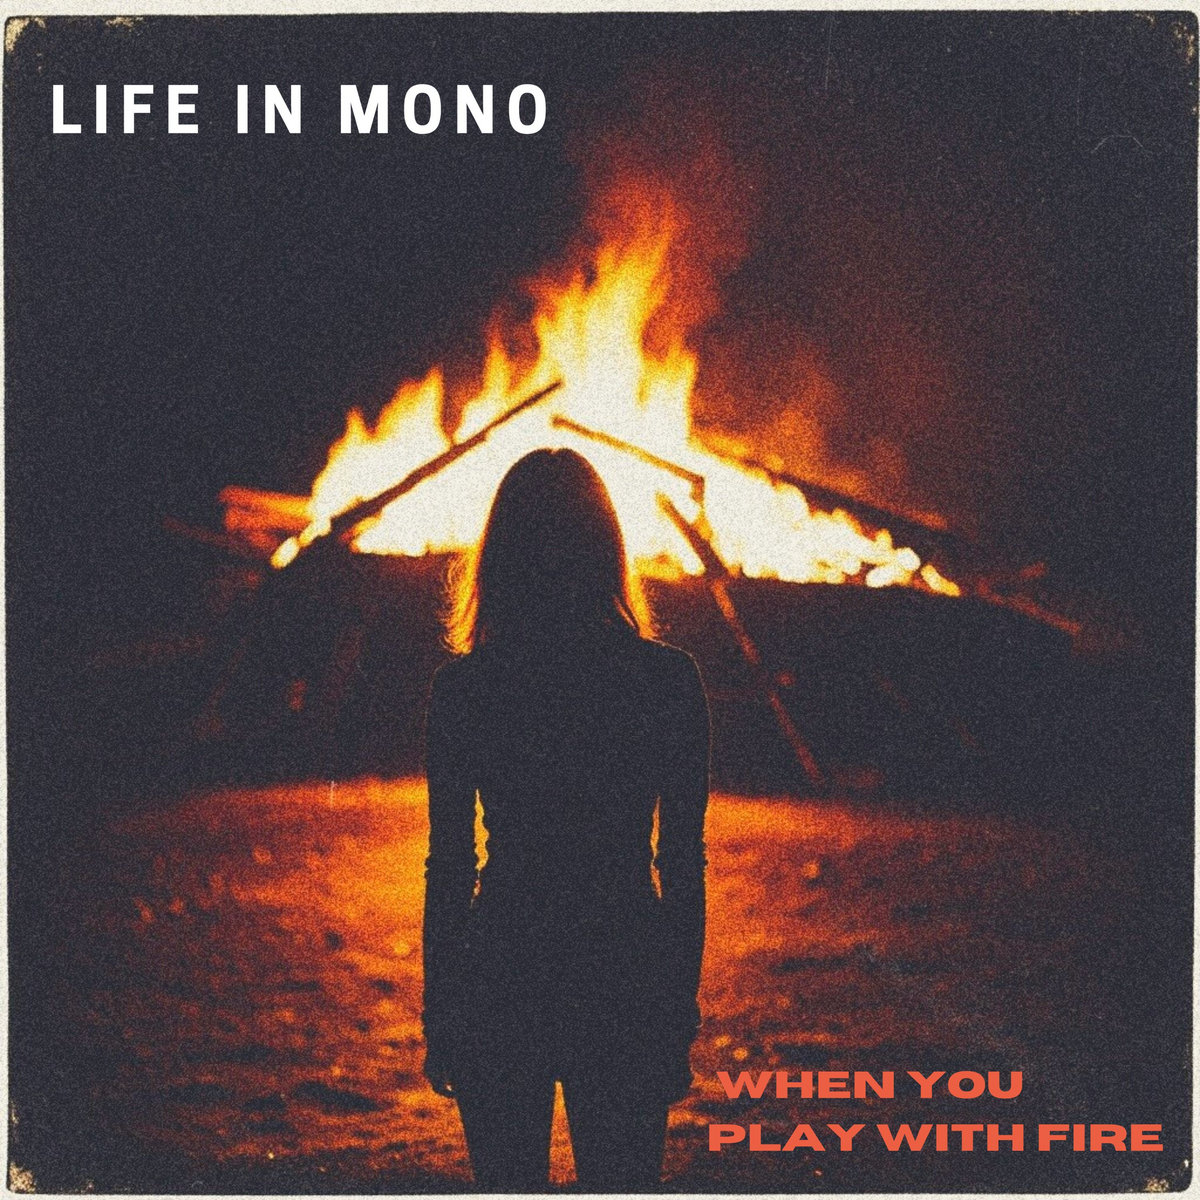 LISTEN: “When You Play with Fire” by Life in Mono